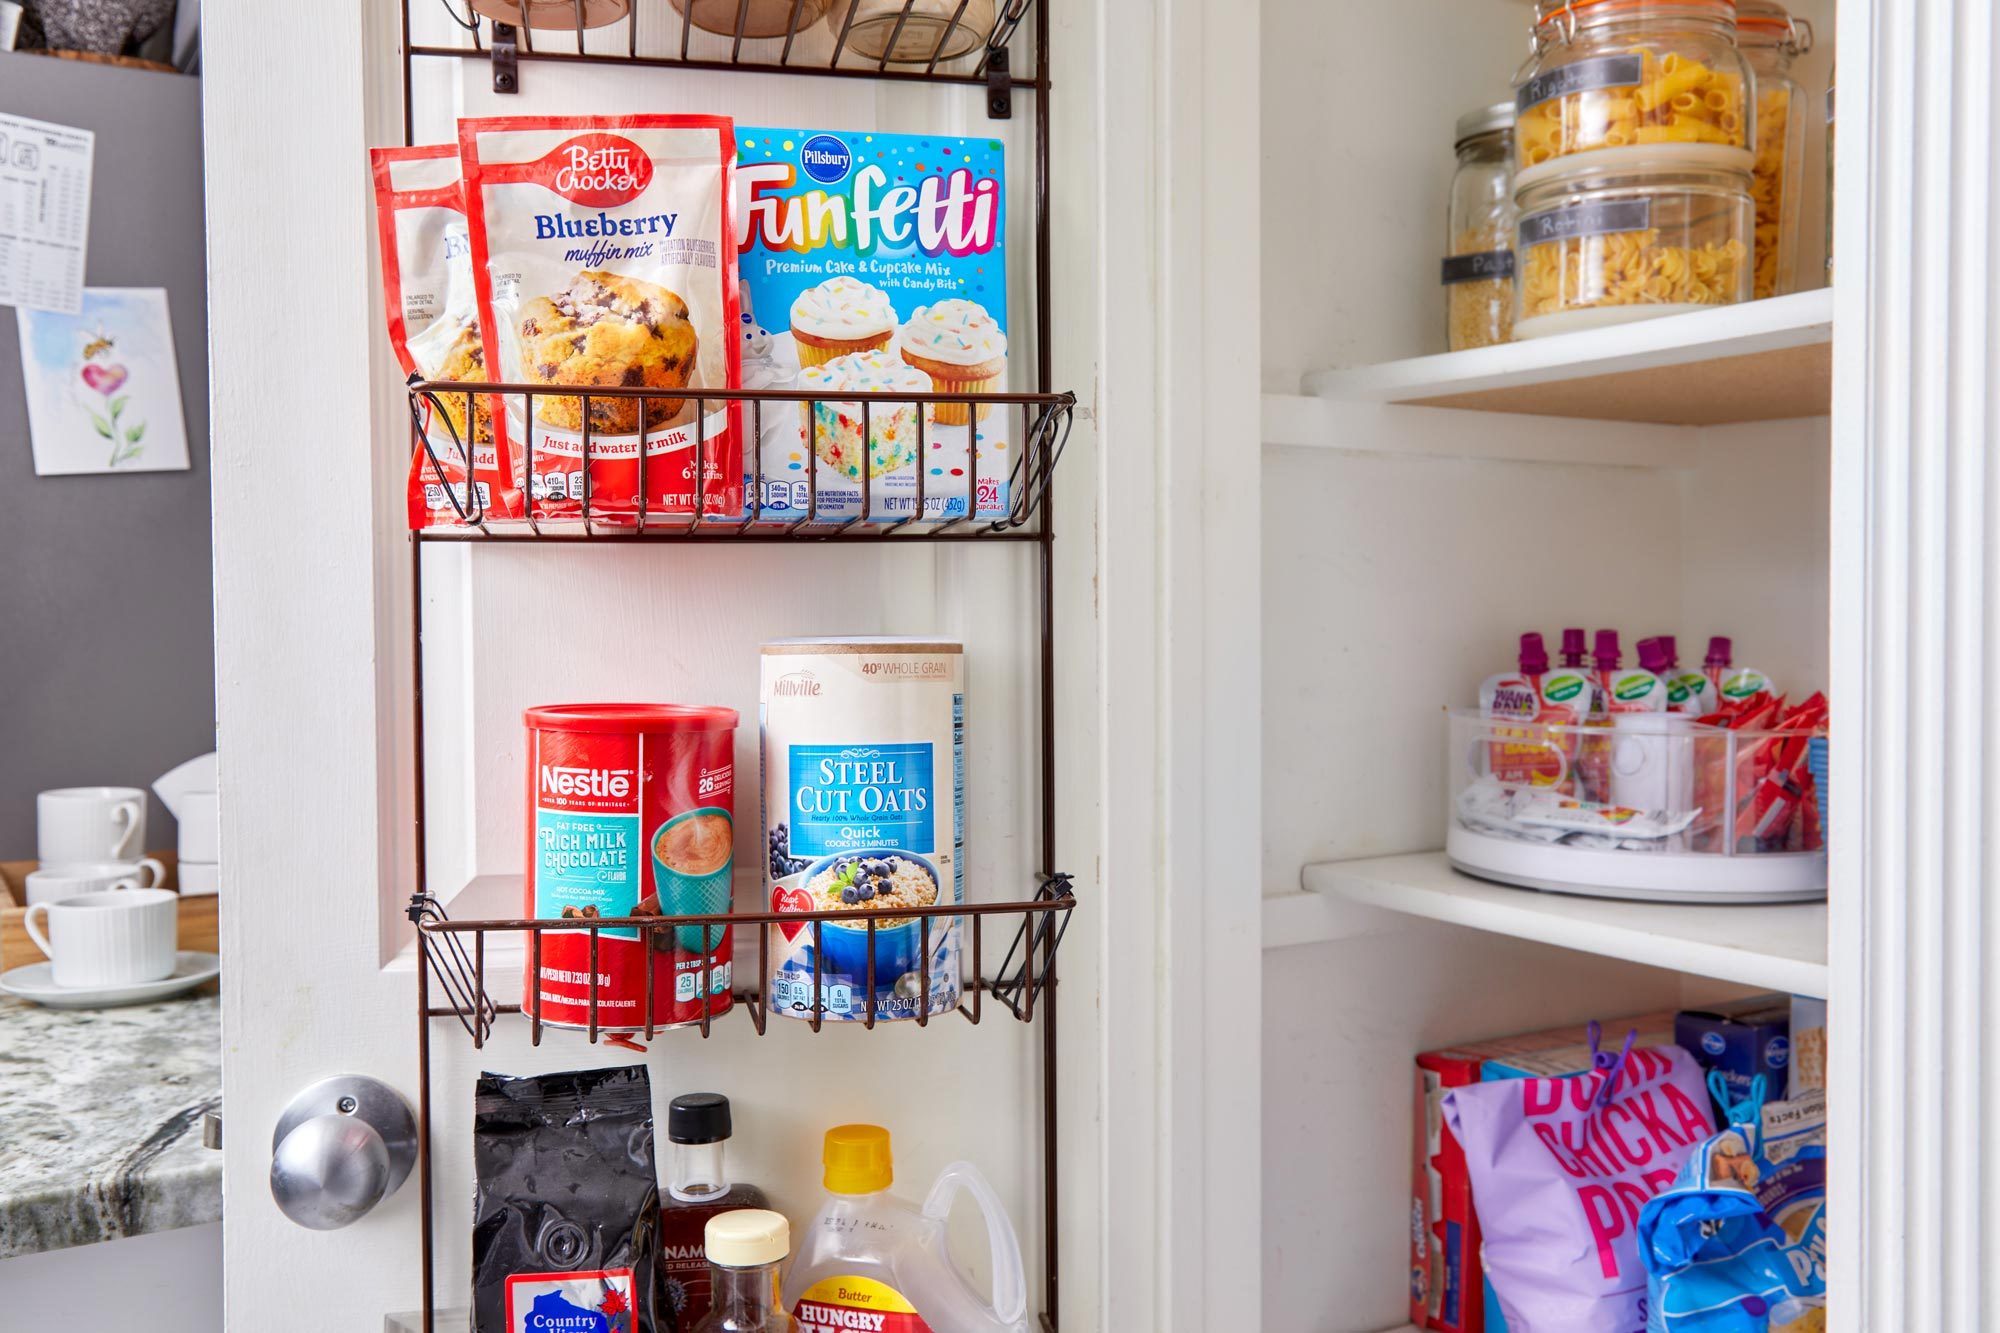 15 Pantry Storage Ideas on  That Will Save Space Under $30